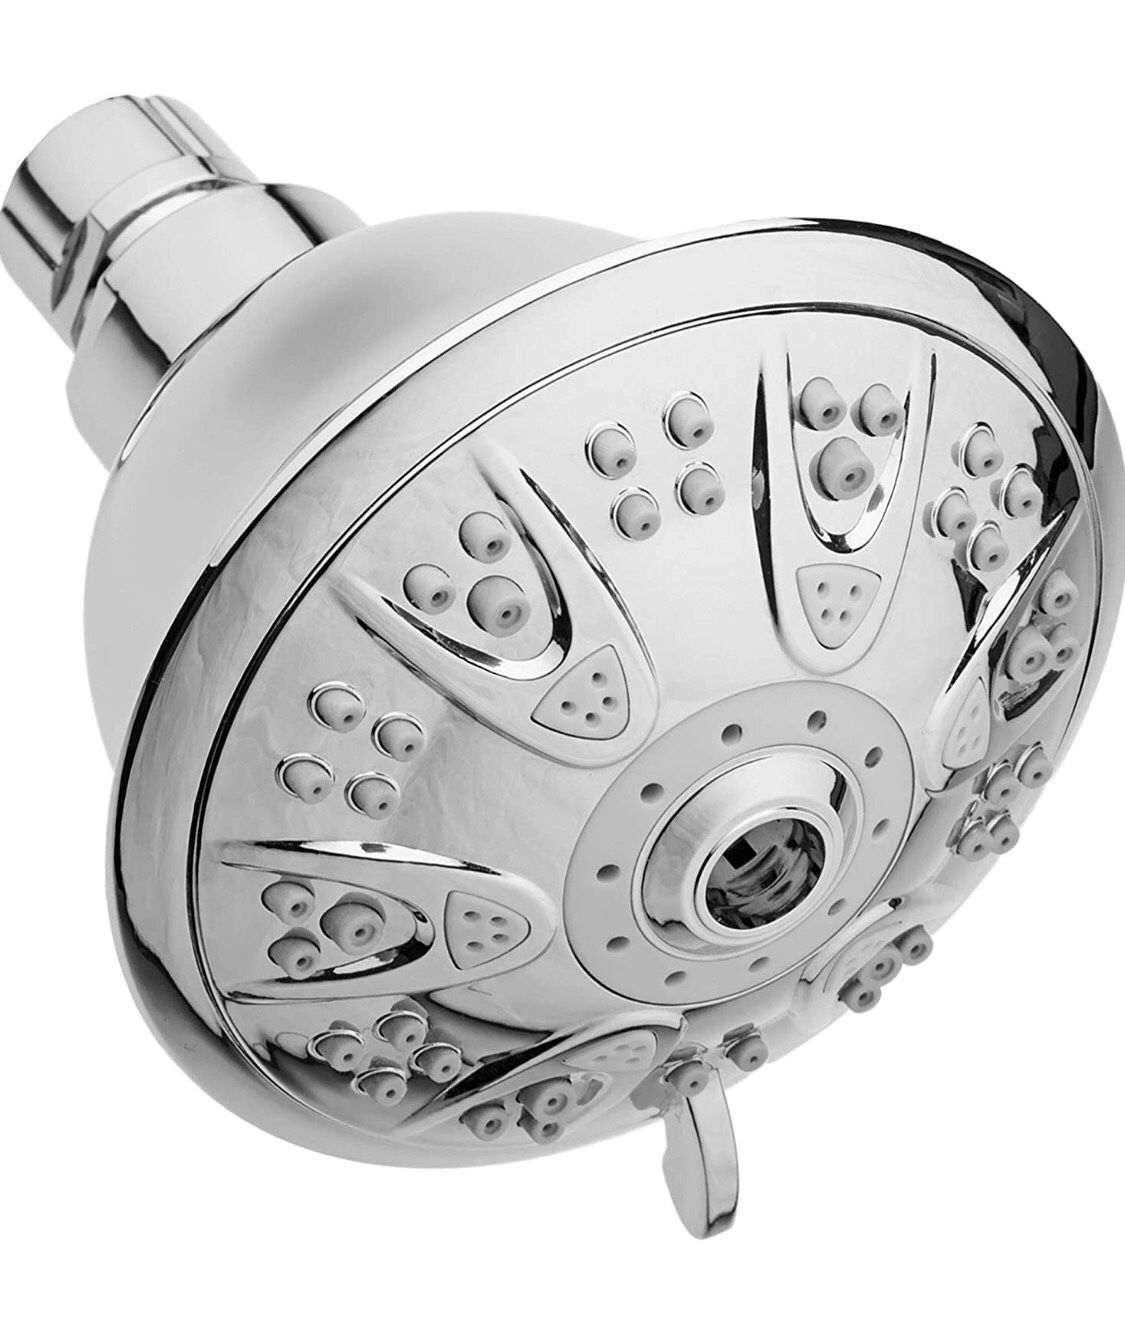 High-Pressure Shower Head 5-Setting - 4" Chrome Face Rain Shower head for Low Flow Showers - Powerful Shower Spray Even with Low Water Pressure and F